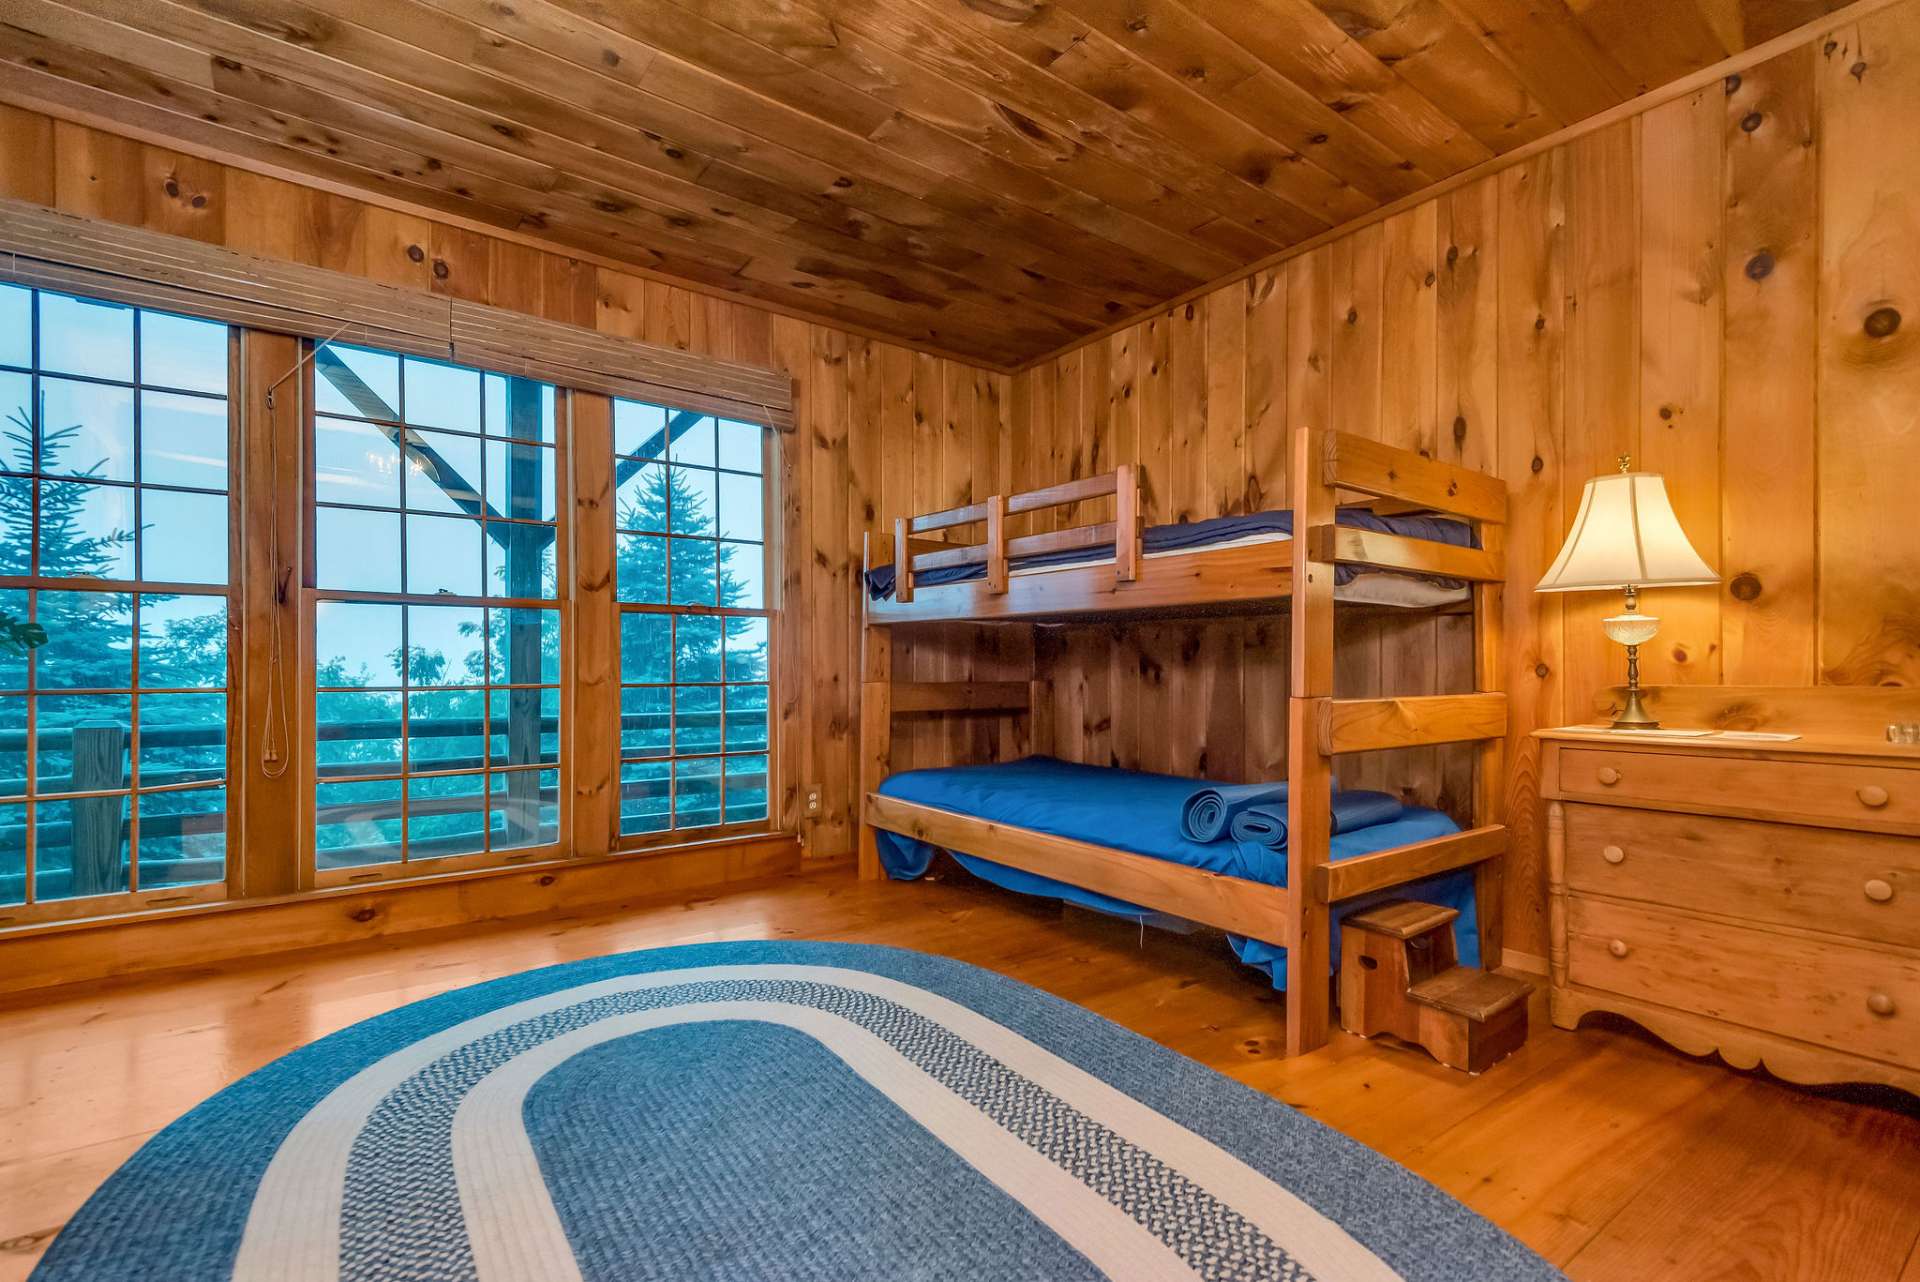 This room is currently called the bunk room where the grandkids can feel like they're camping in the great outdoors with the floor to ceiling windows.